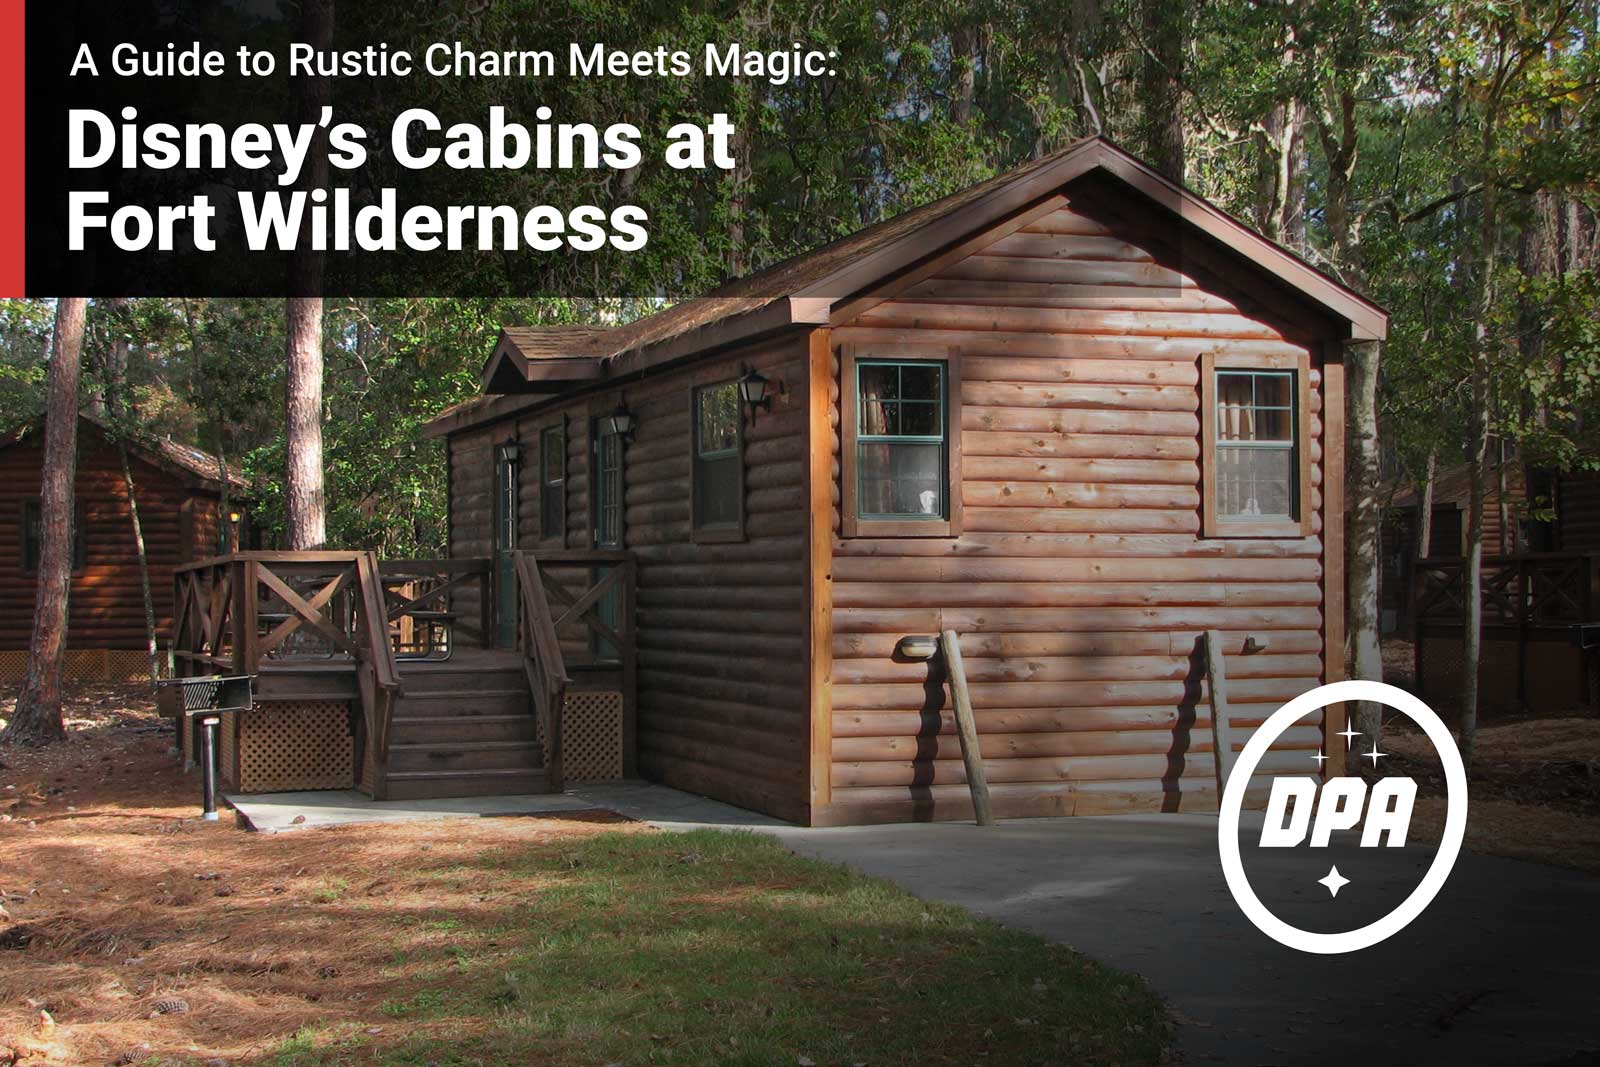 Disney’s The Cabins at Fort Wilderness: A Guide to Rustic Charm Meets Magic